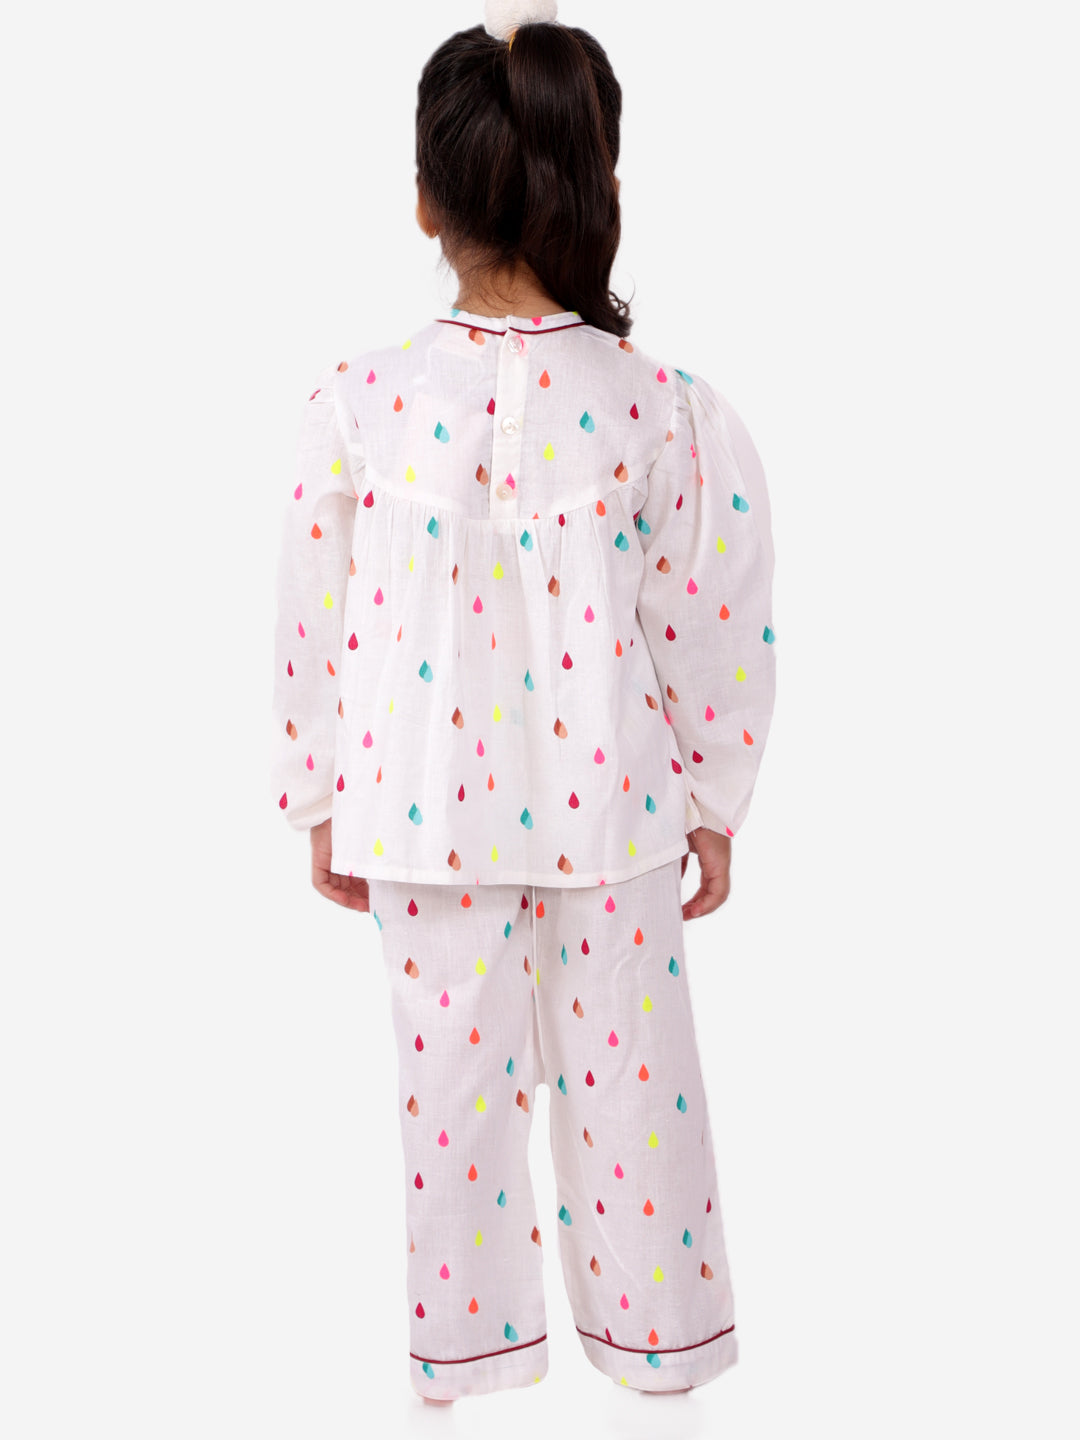 Off White Full Sleeve All Over Print Sleepwear Sets